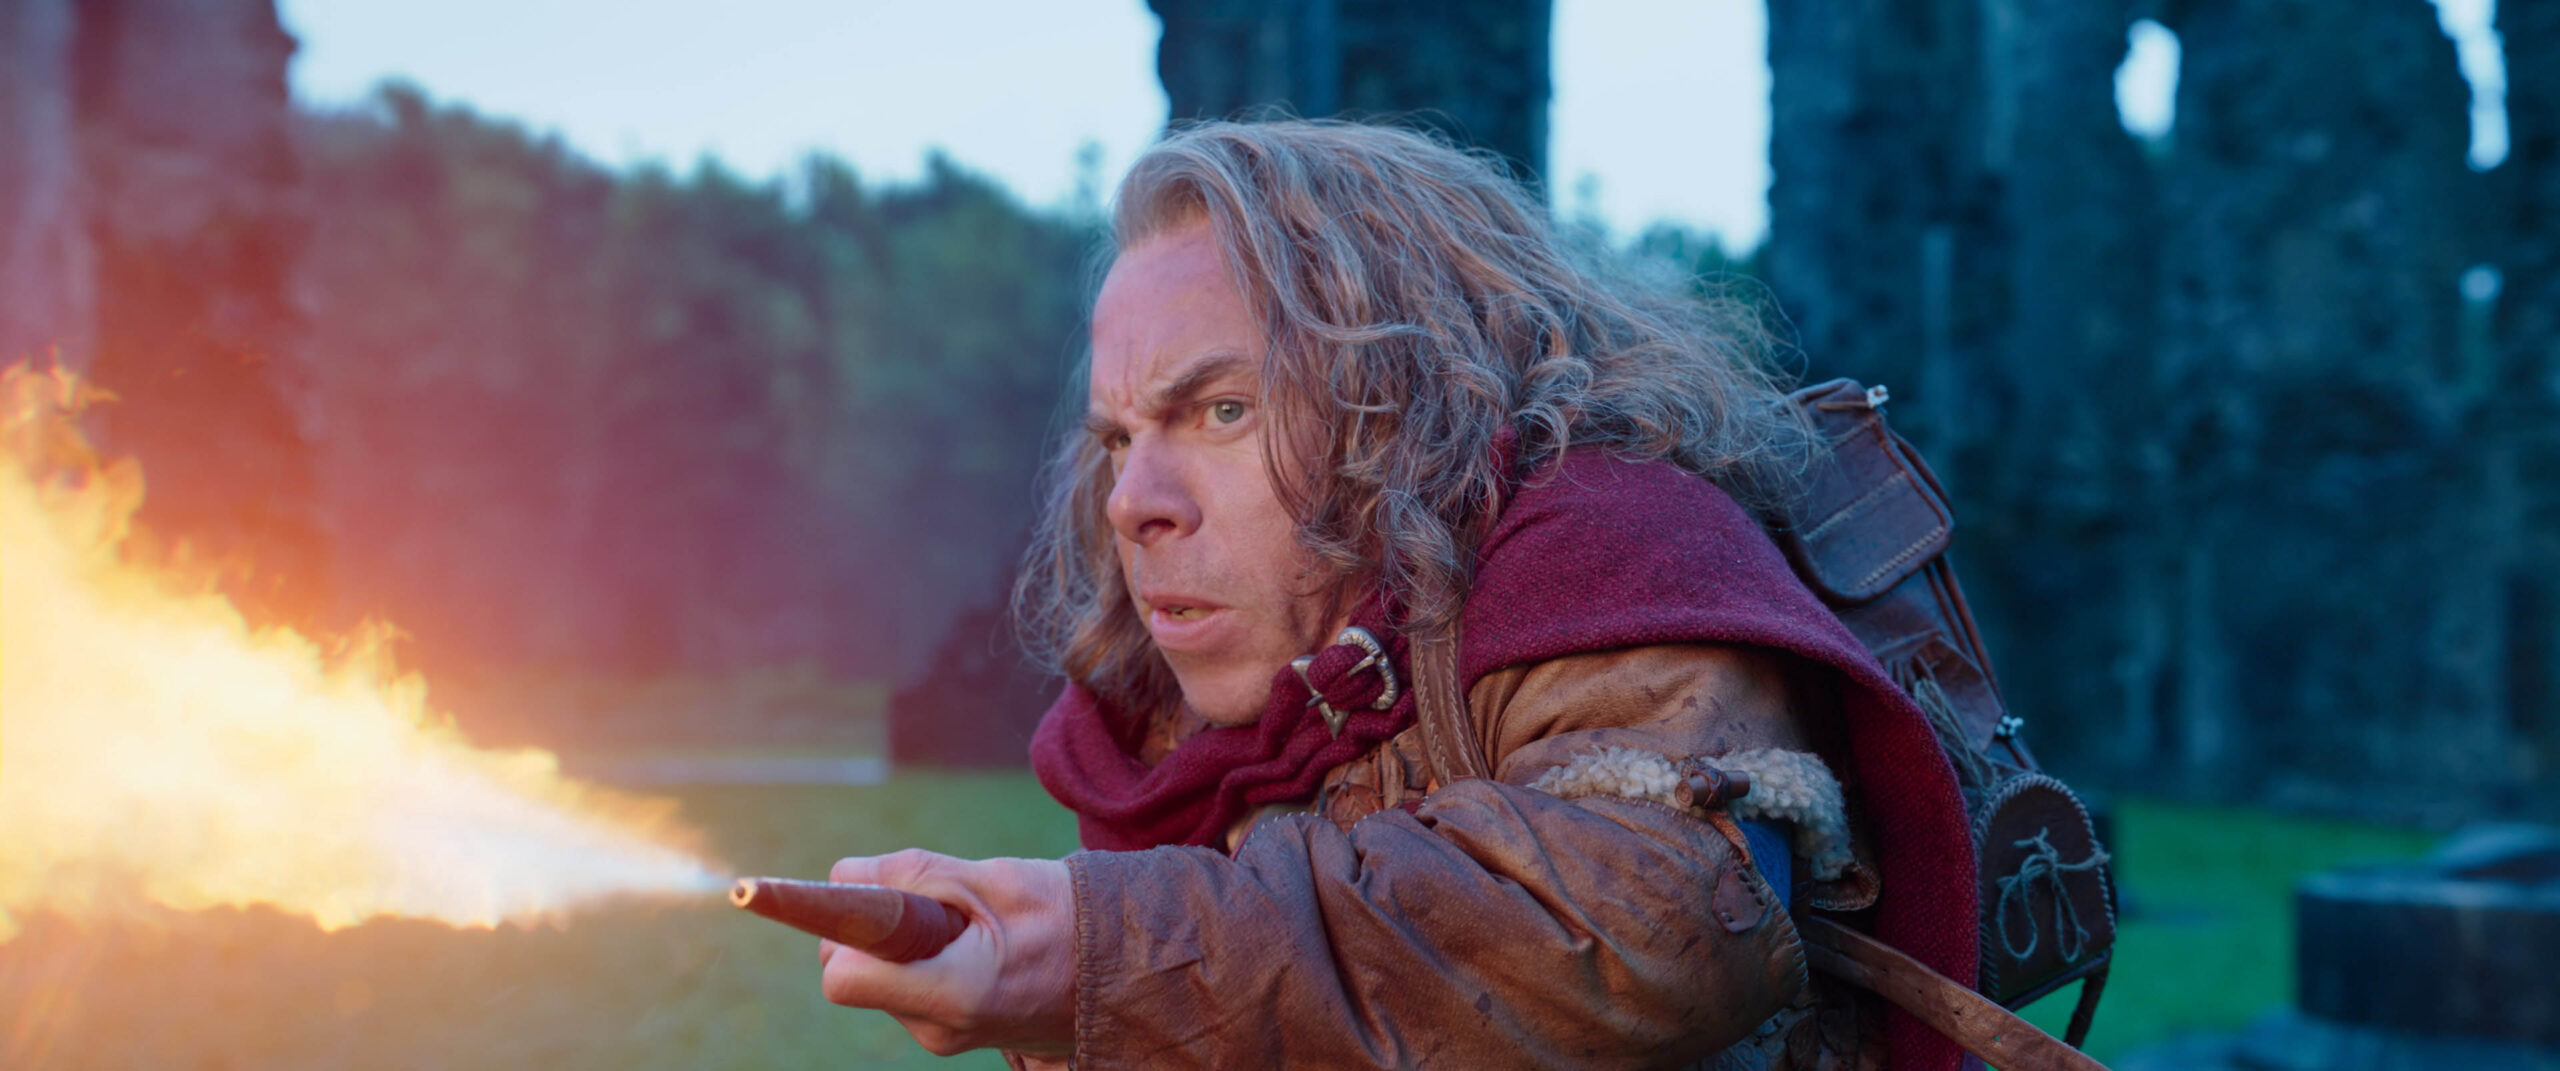 Willow Ufgood (Warwick Davis) in Willow [credit: Lucasfilm; Copyright 2022 Lucasfilm Ltd. and TM. All Rights Reserved; courtesy of Disney]